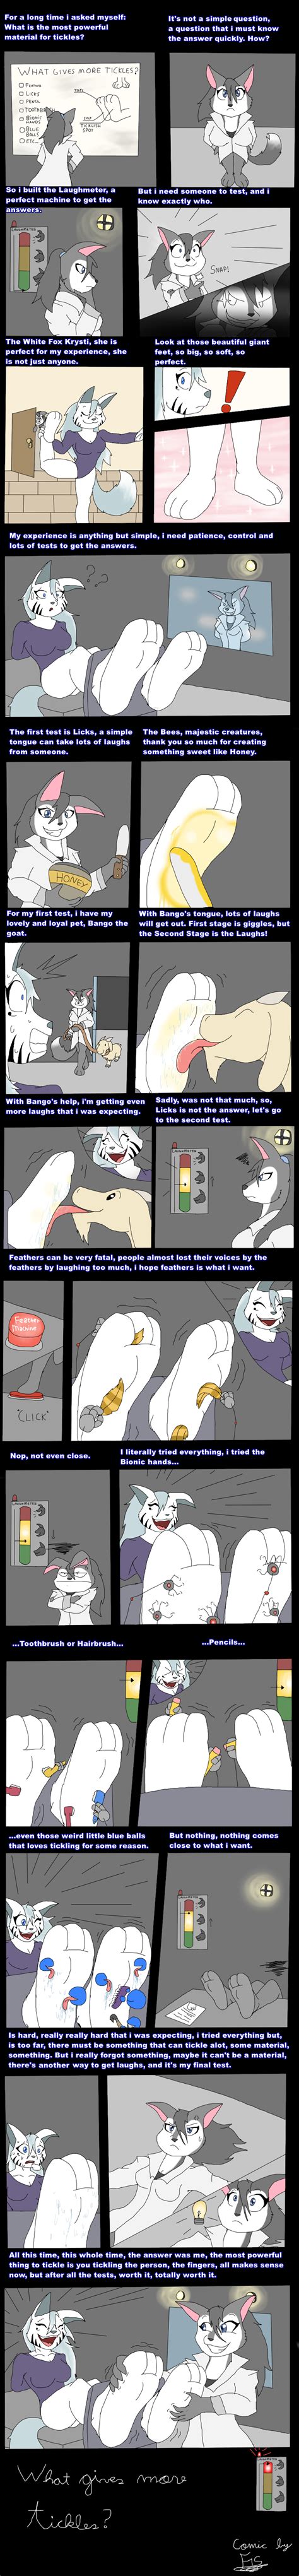 Comic What Gives More Tickles By Misterfis On Deviantart